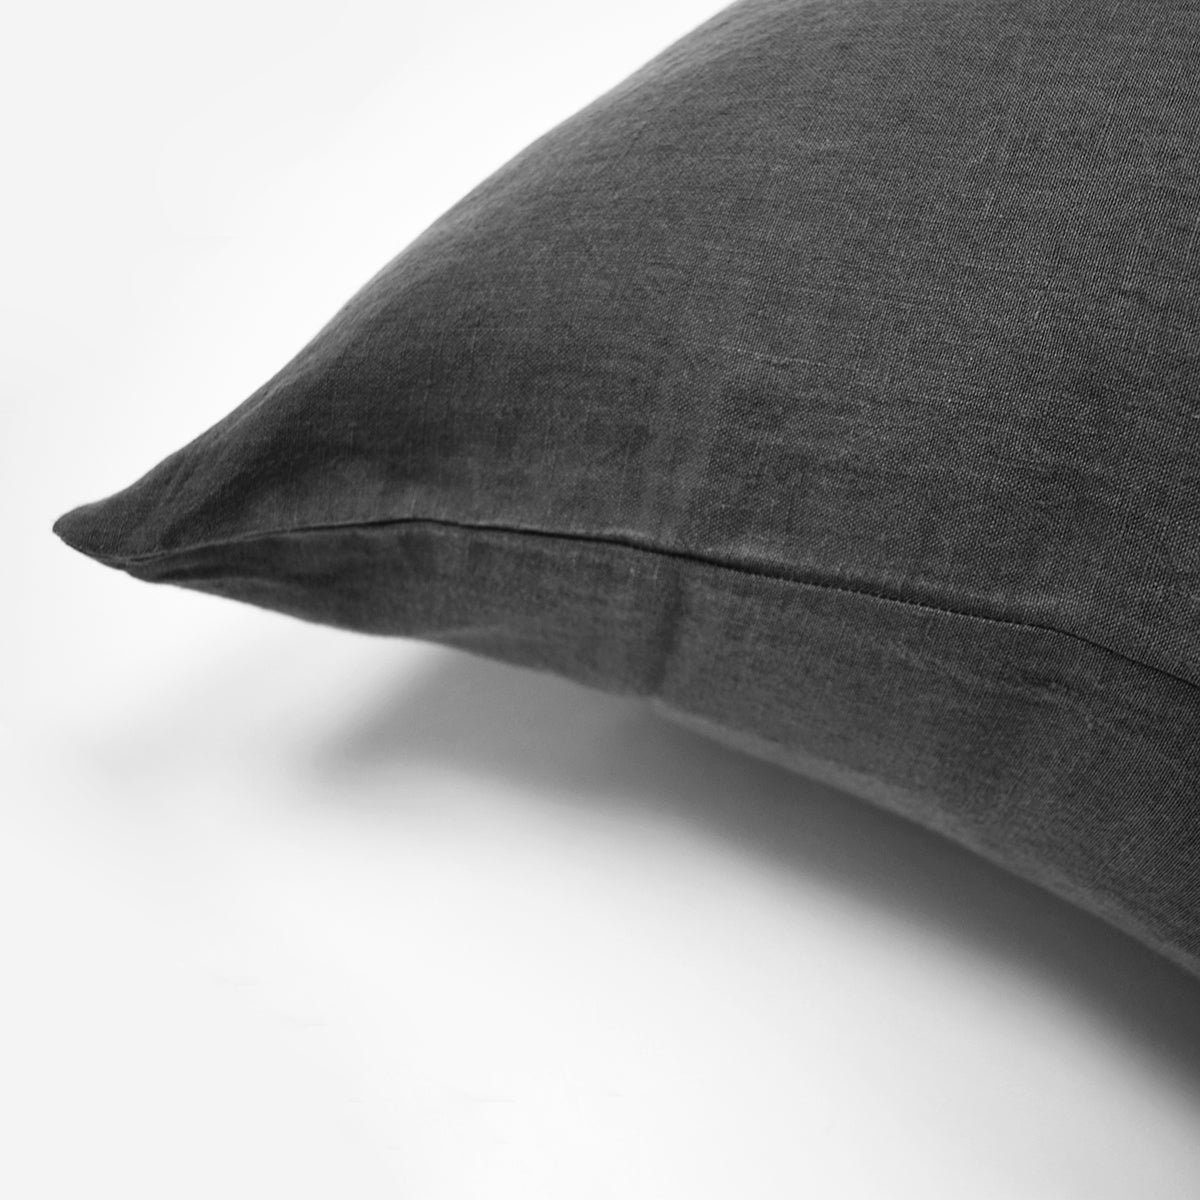 Linge Particulier Storm Grey Euro Linen Pillowcase Sham for a colorful linen bedding look in charcoal grey - Collyer&#39;s Mansion